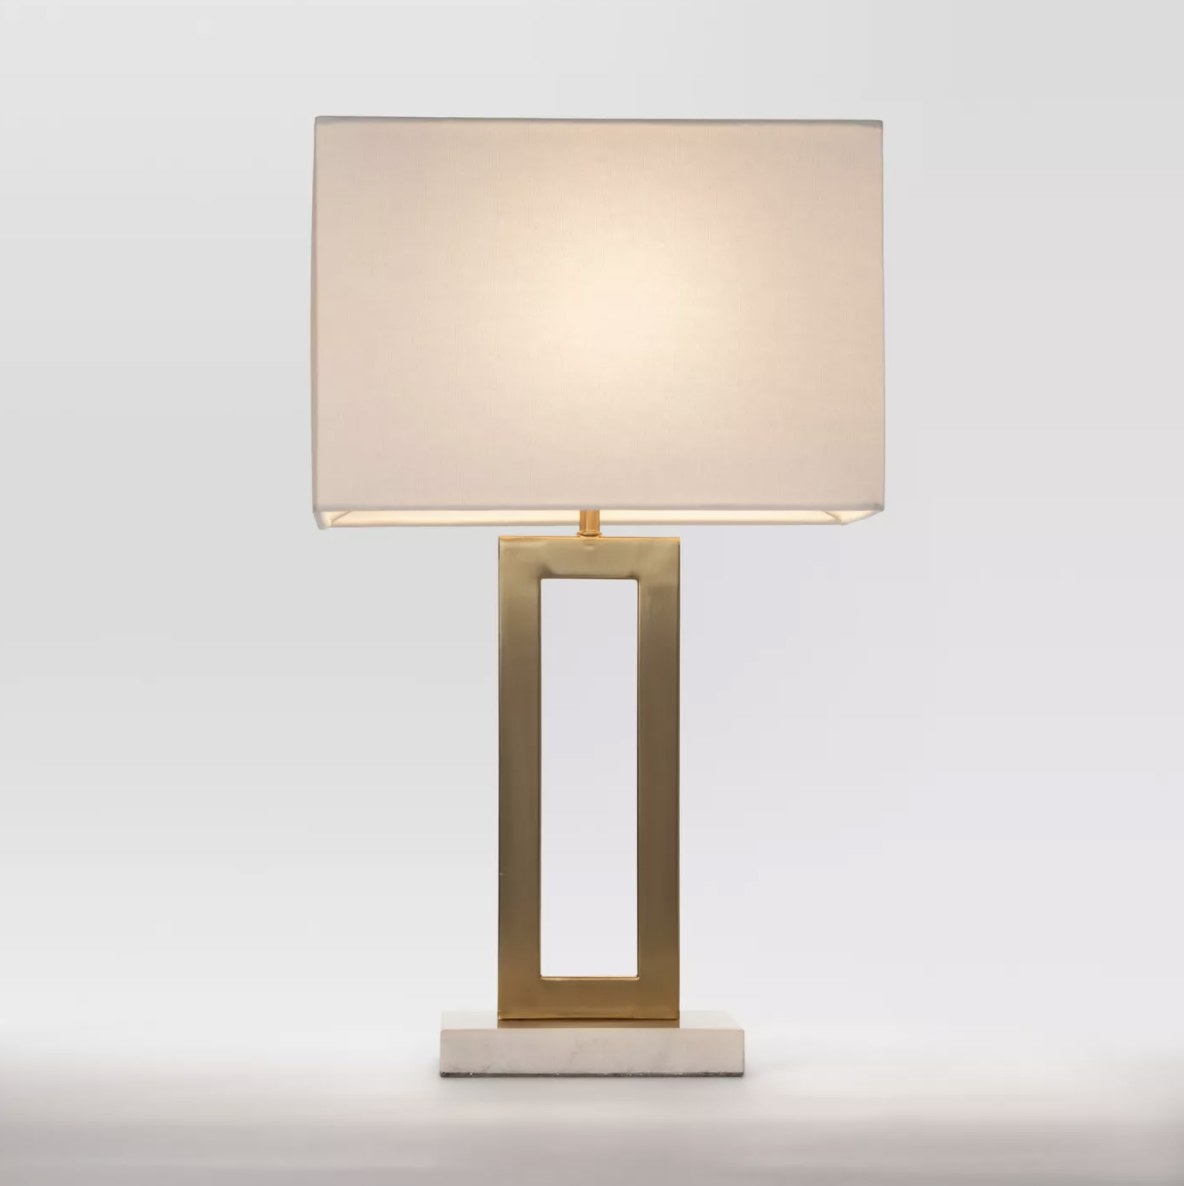 The lamp is on and has a white lampshade connected to a gold rectangular body that sits vertically on a white base 